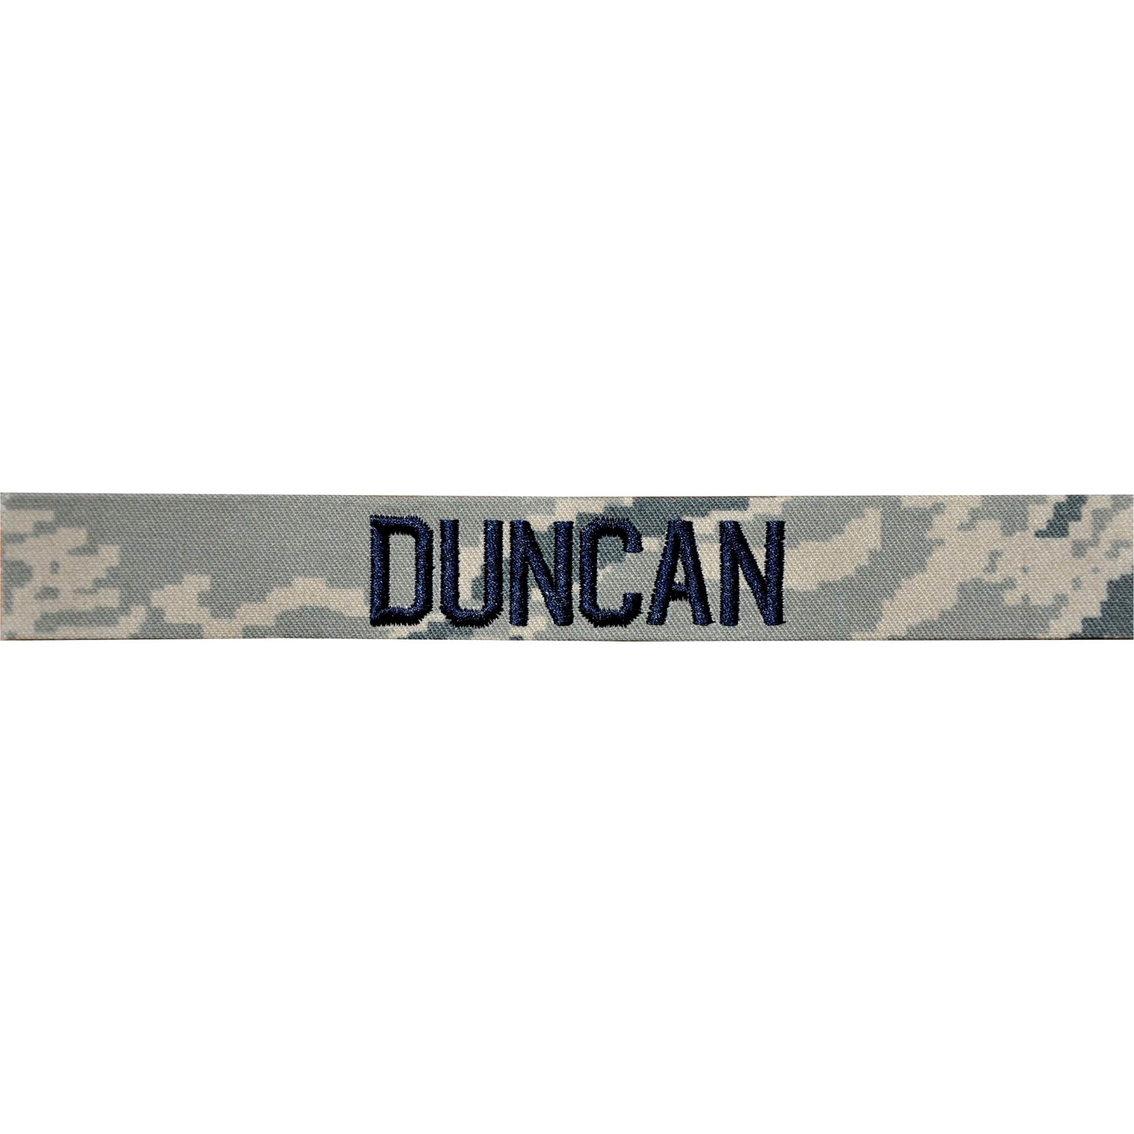 ACU NAME TAPES - With Velcro(r) Name Tape from Hessen Antique